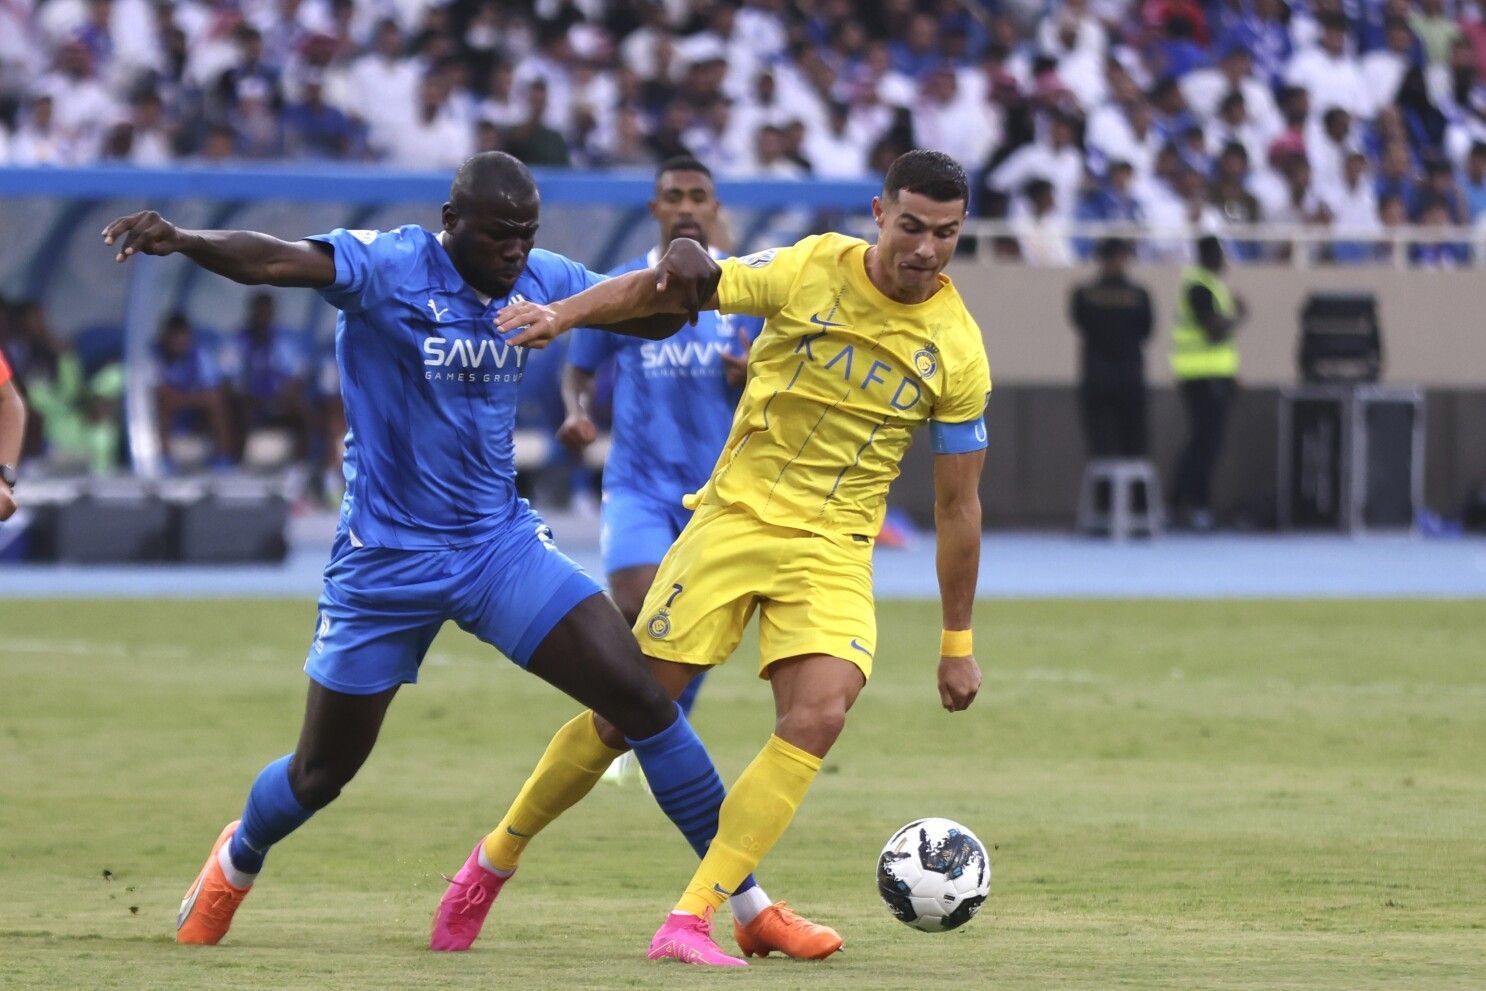 Al Hilal will square off against Al Nassr in the Saudi Pro League on Friday